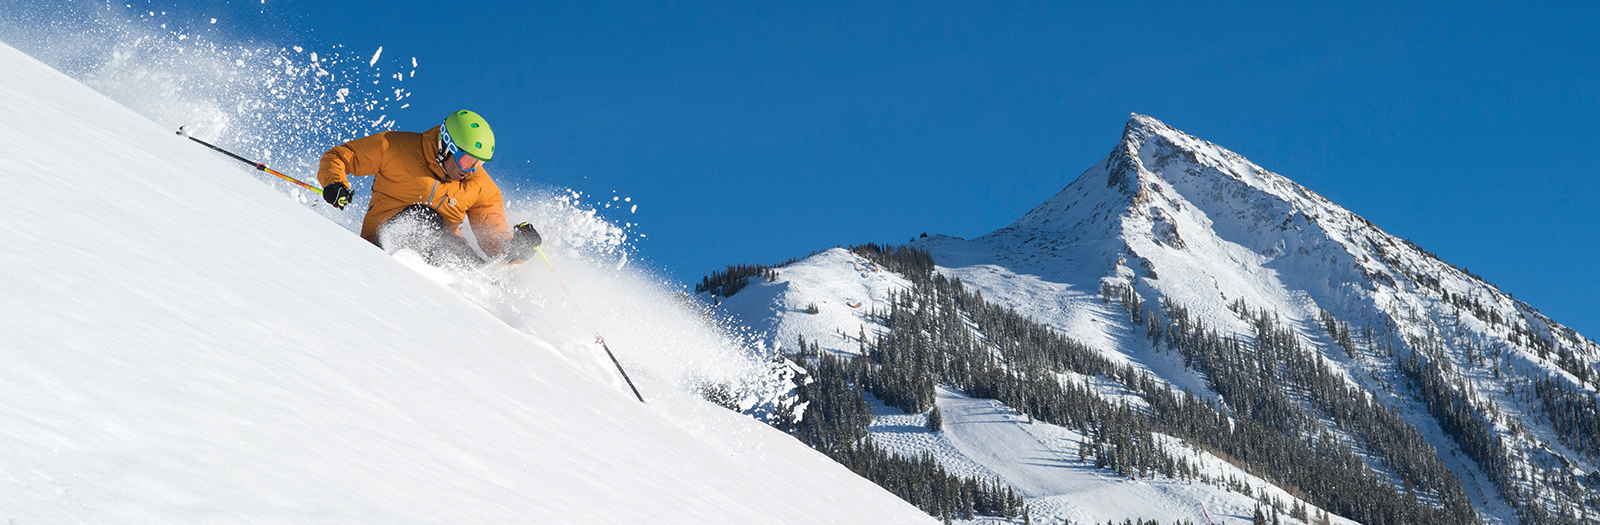 crested butte expert skiing